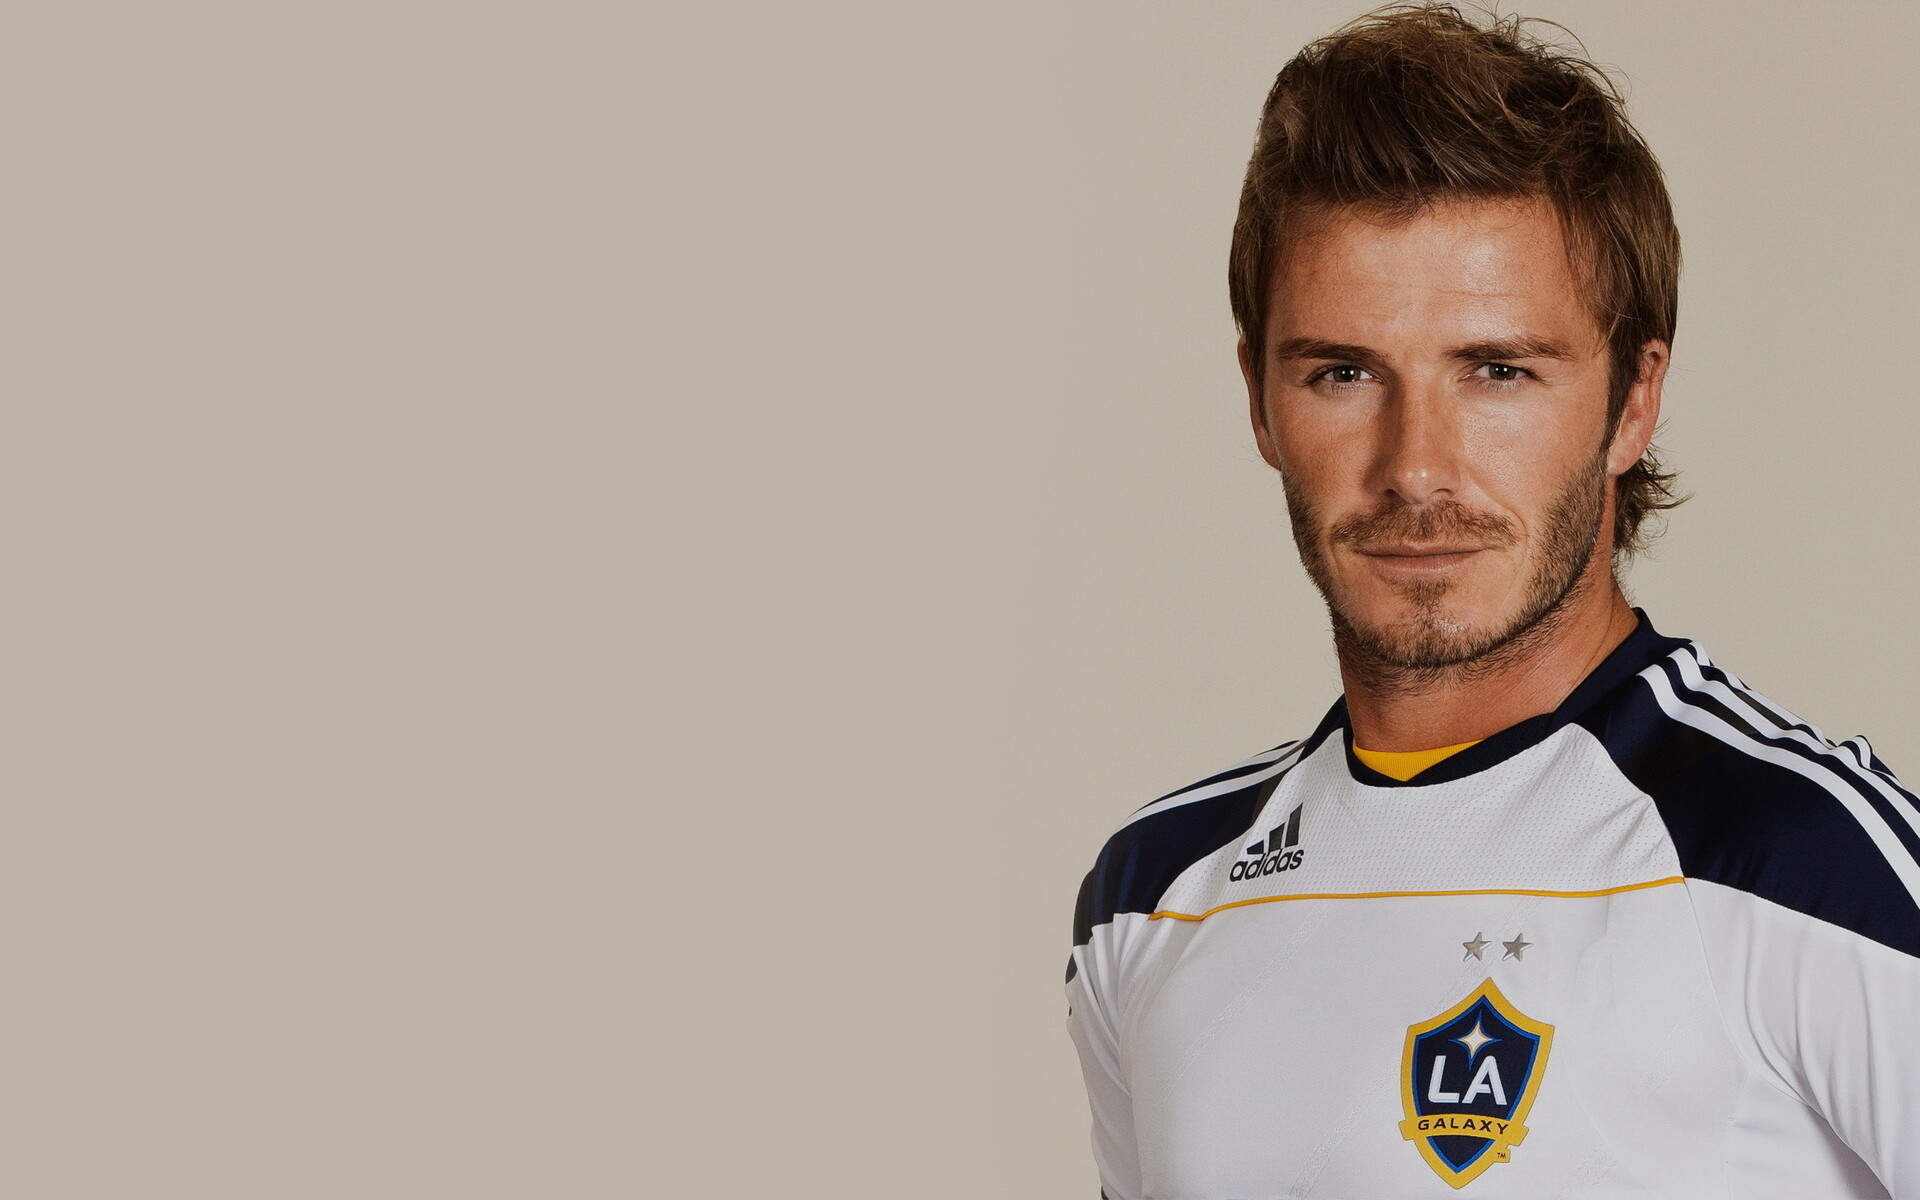 David Beckham: Signed a five-year deal on 11 January 2007, to play for the LA Galaxy. 1920x1200 HD Background.